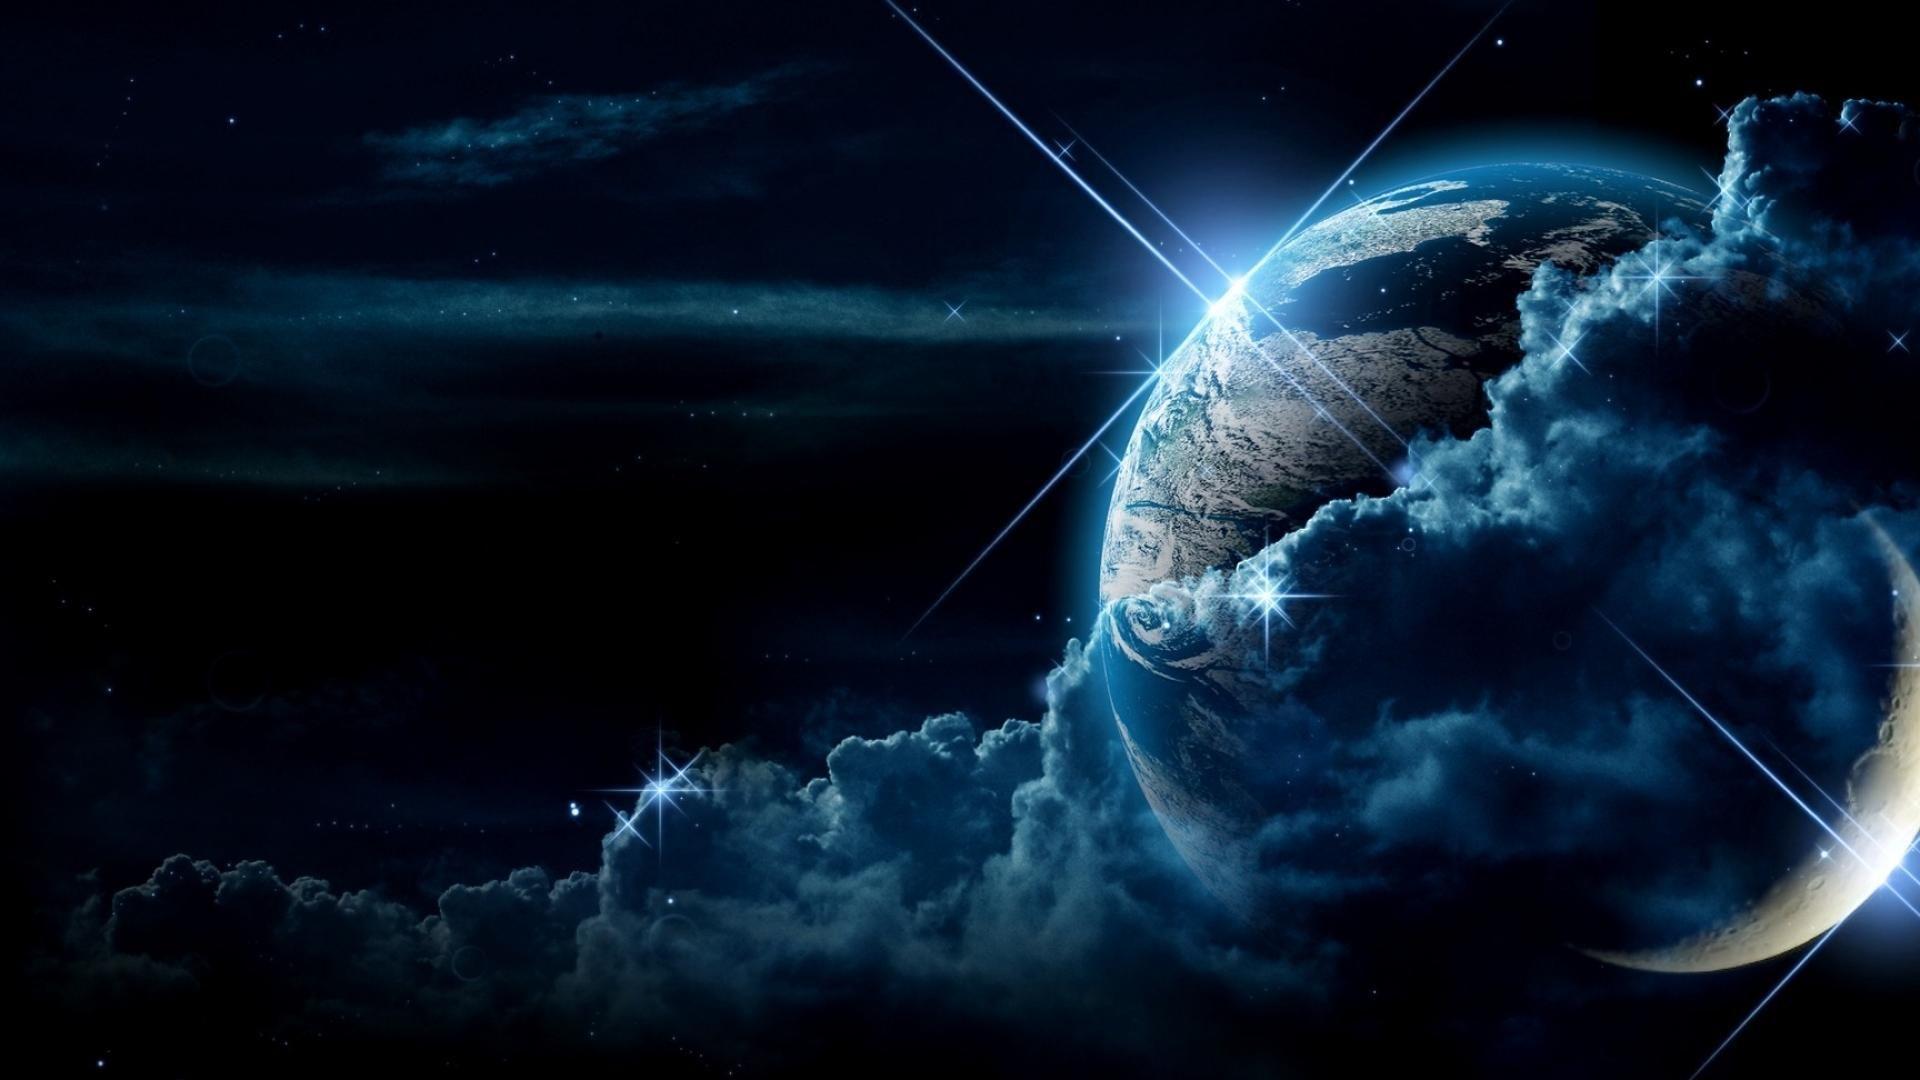 Space Background Wallpaper Fantastic HDQ Live Space Wallpaper. HD